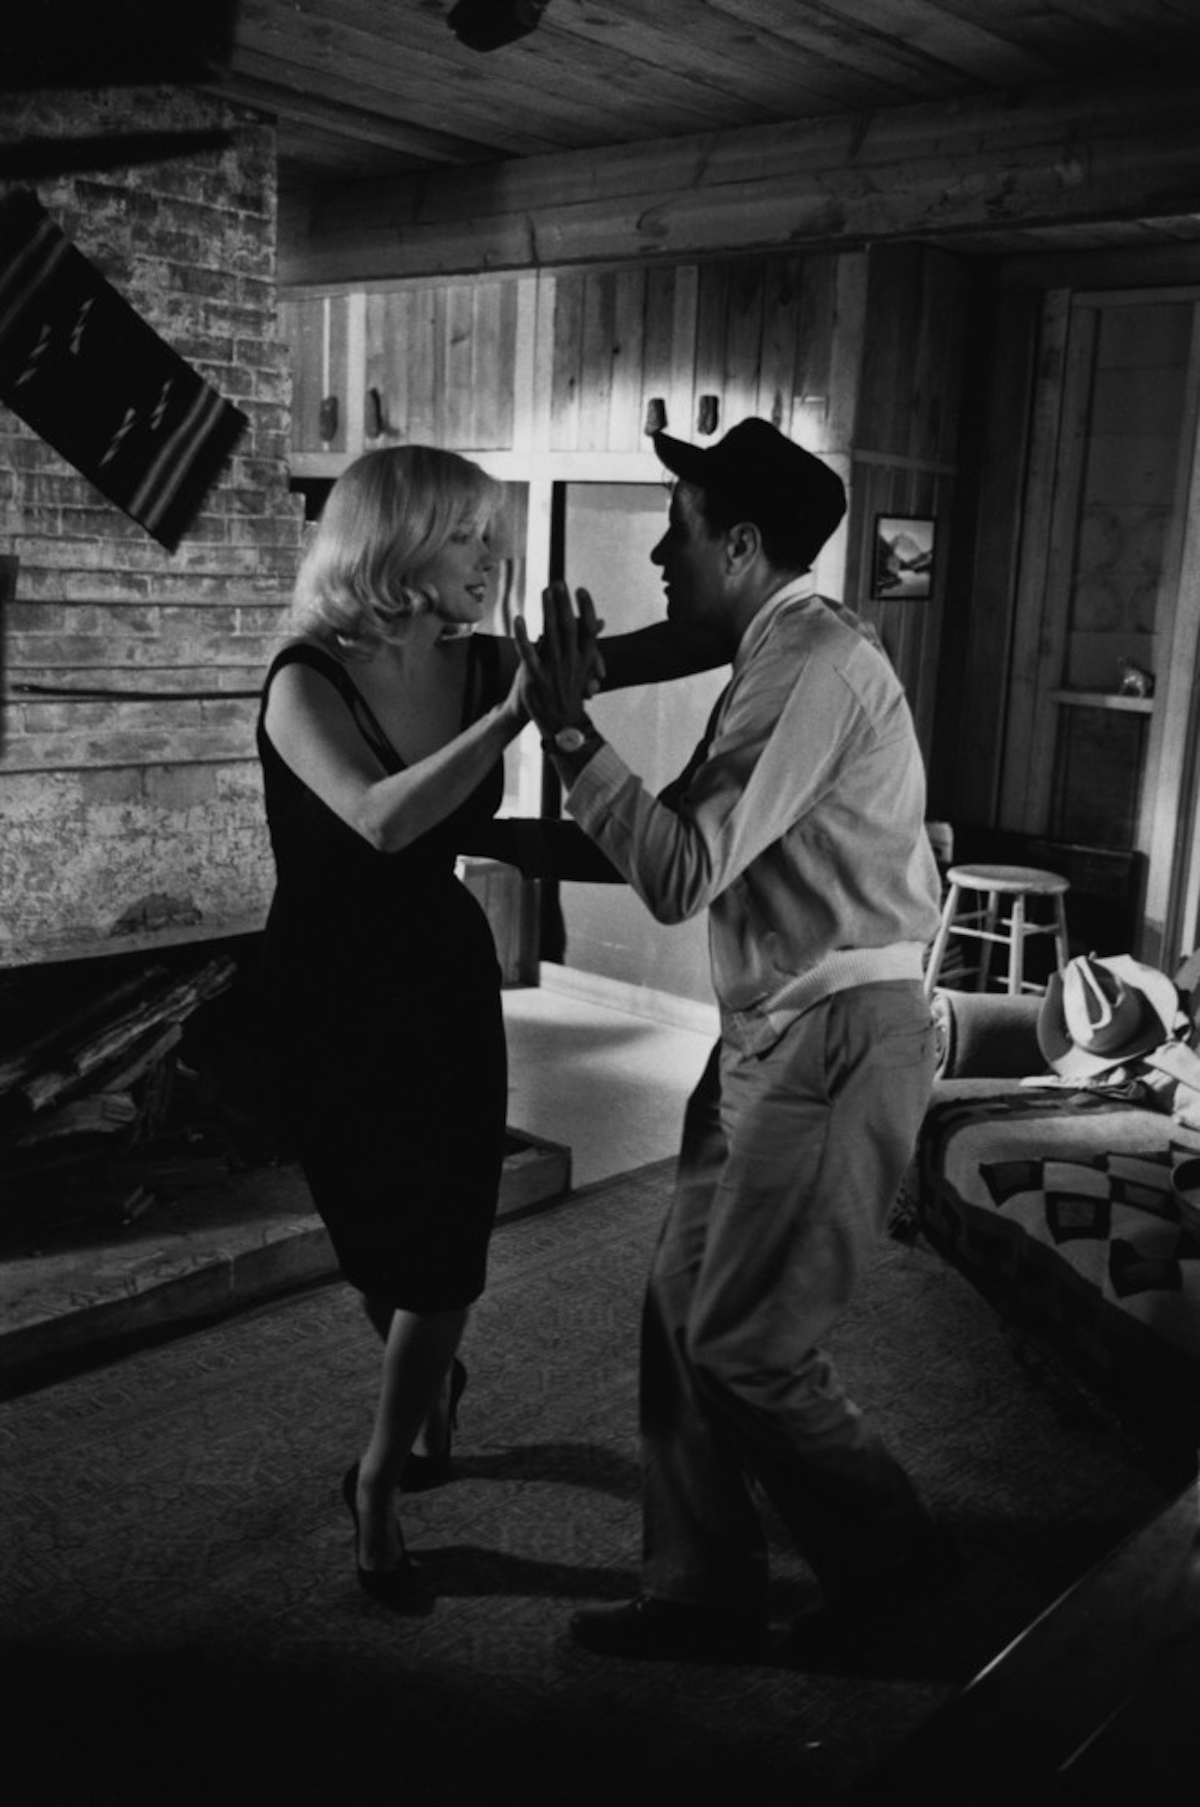 Marilyn Monroe and Elie Wallach on the set of “The Misfits”